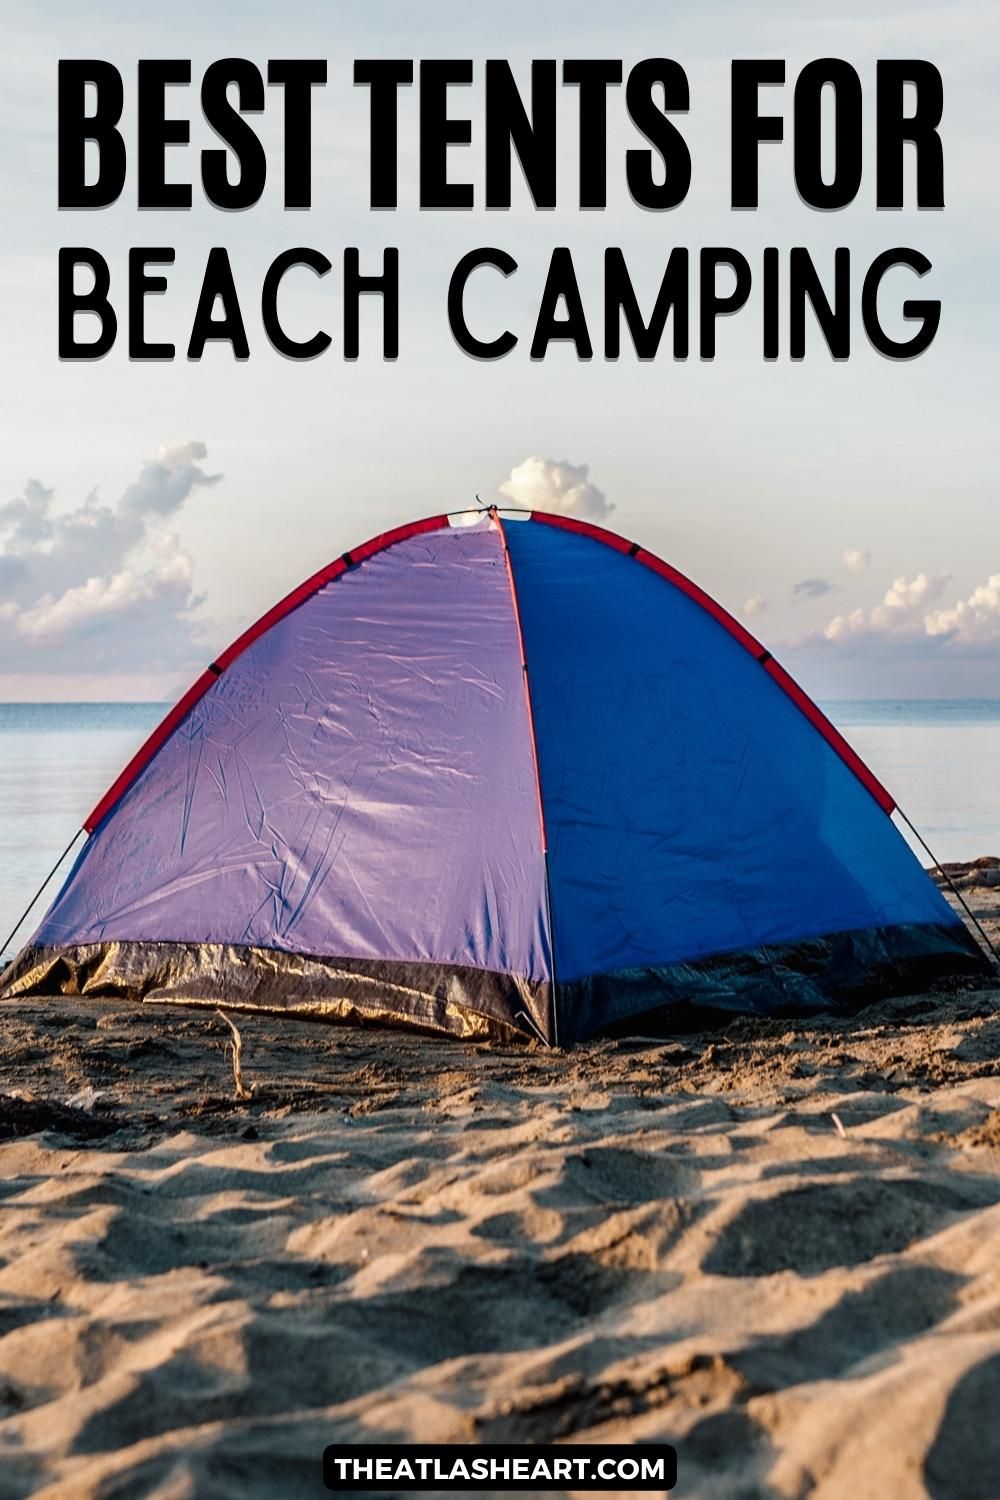 A blue and purple tent on a sandy beach with a calm sea and a partly cloudy sky in the background, with the text overlay, "Best Tents for Beach Camping."